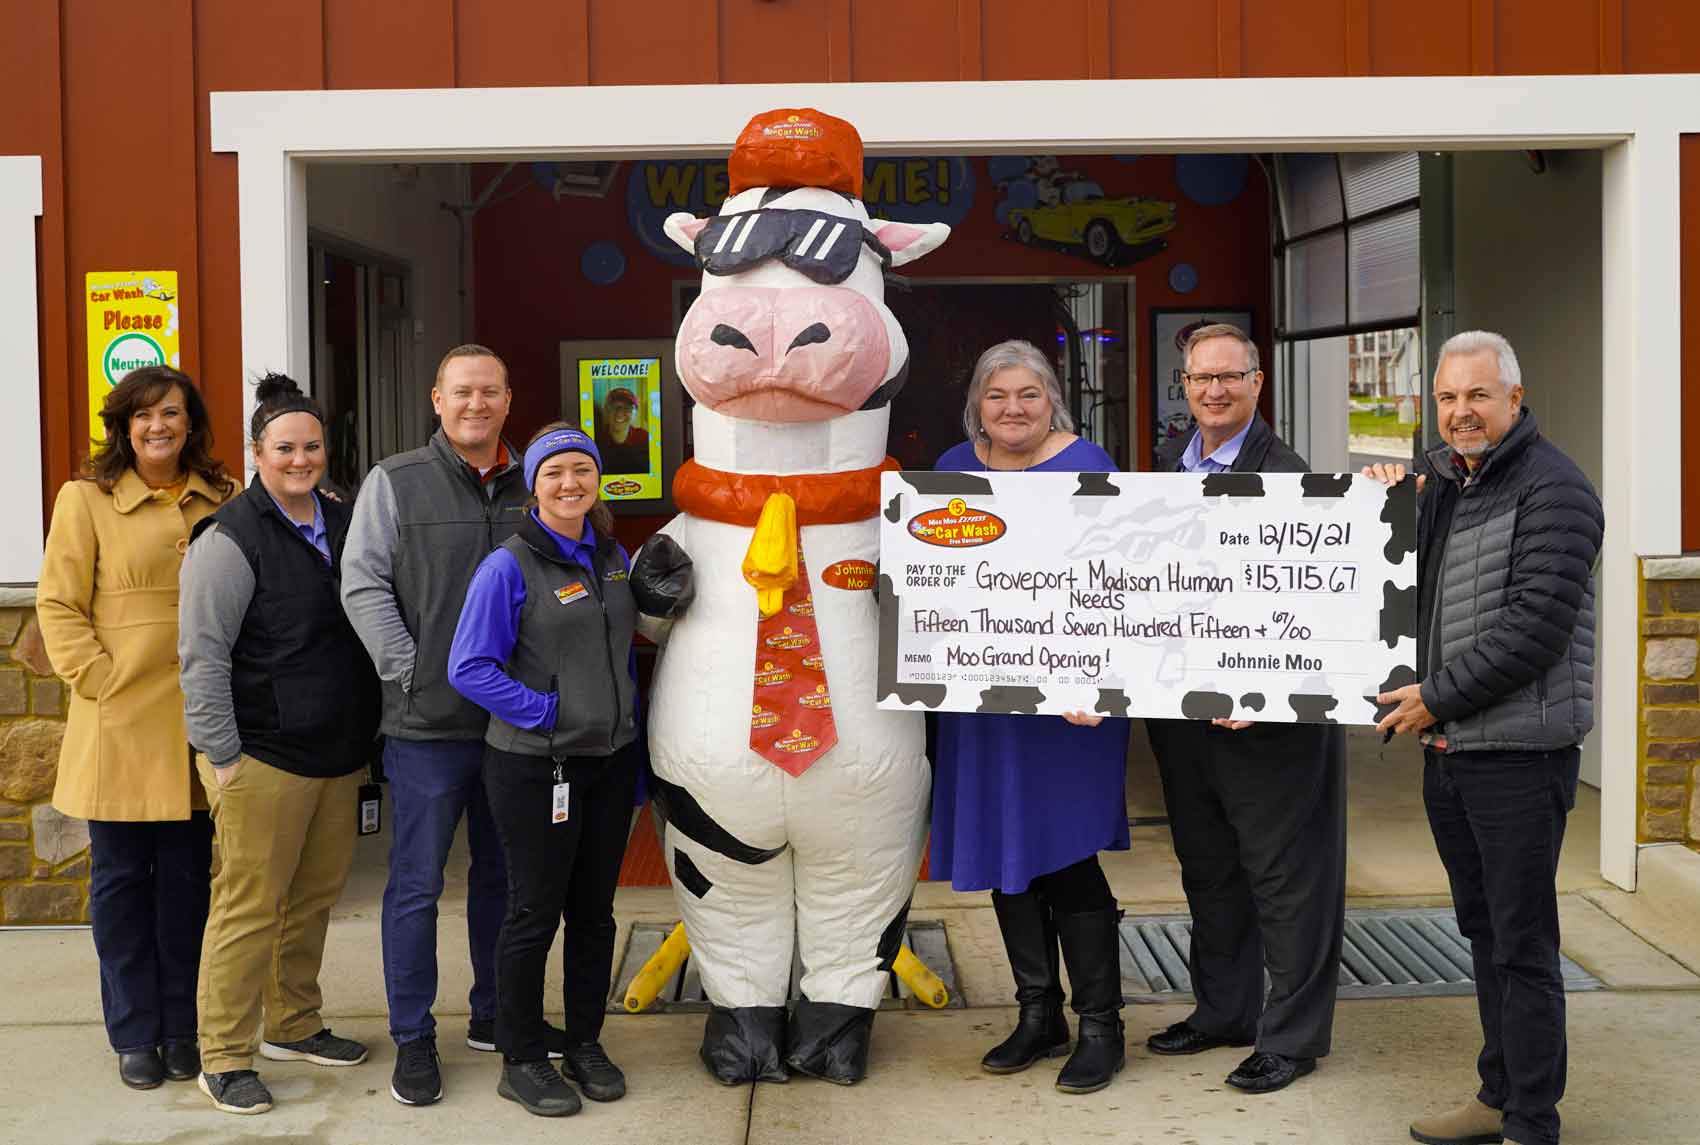 Moo Moo Express Car Wash Opens 21st Central Ohio Location; Raises $15,715 for Groveport Madison Human Needs